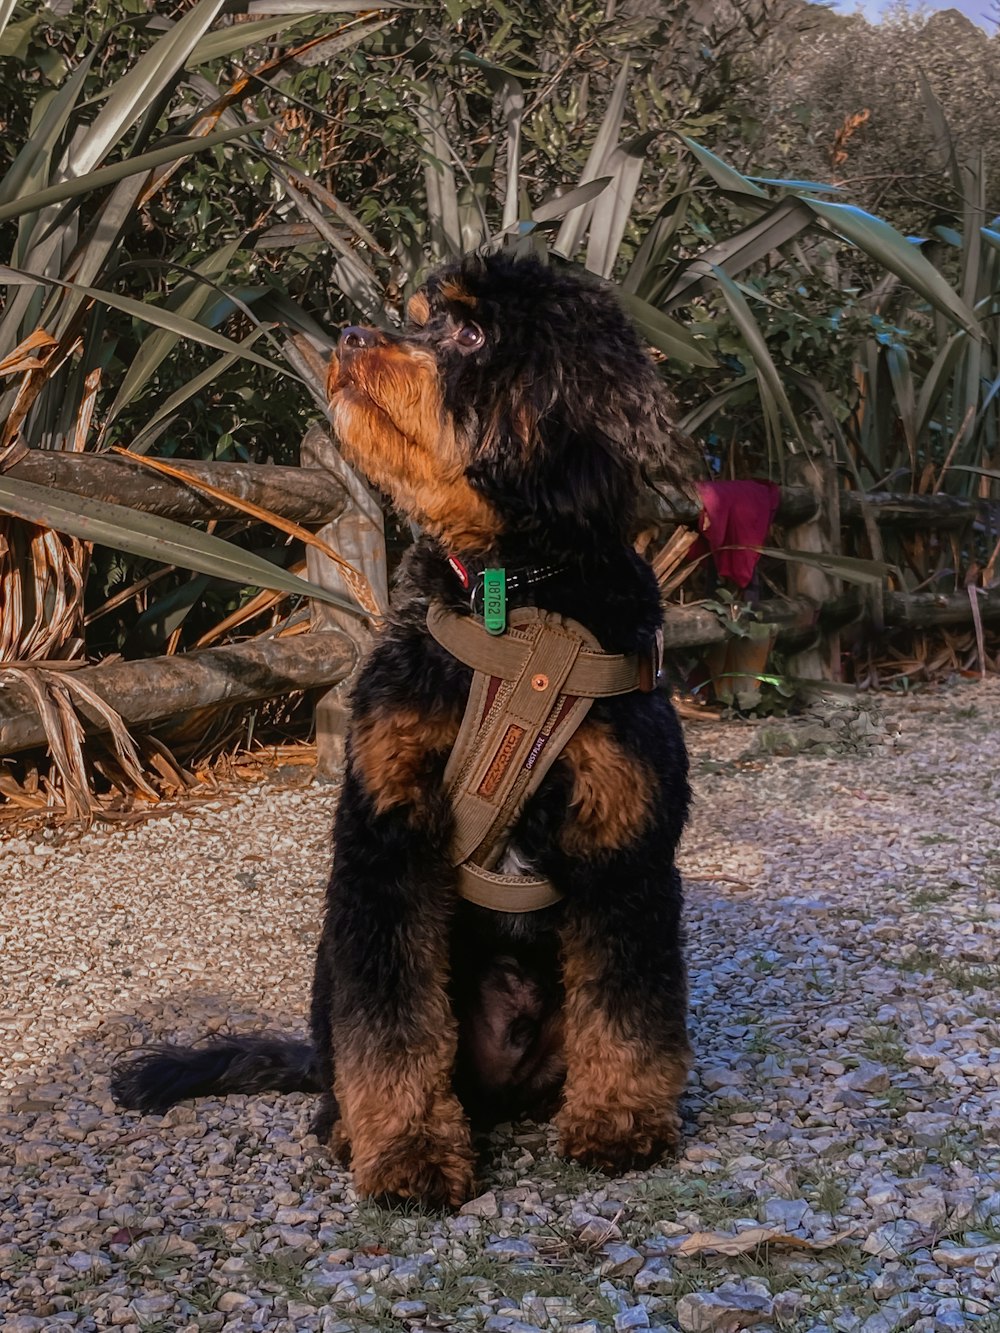 a black and brown dog wearing a harness